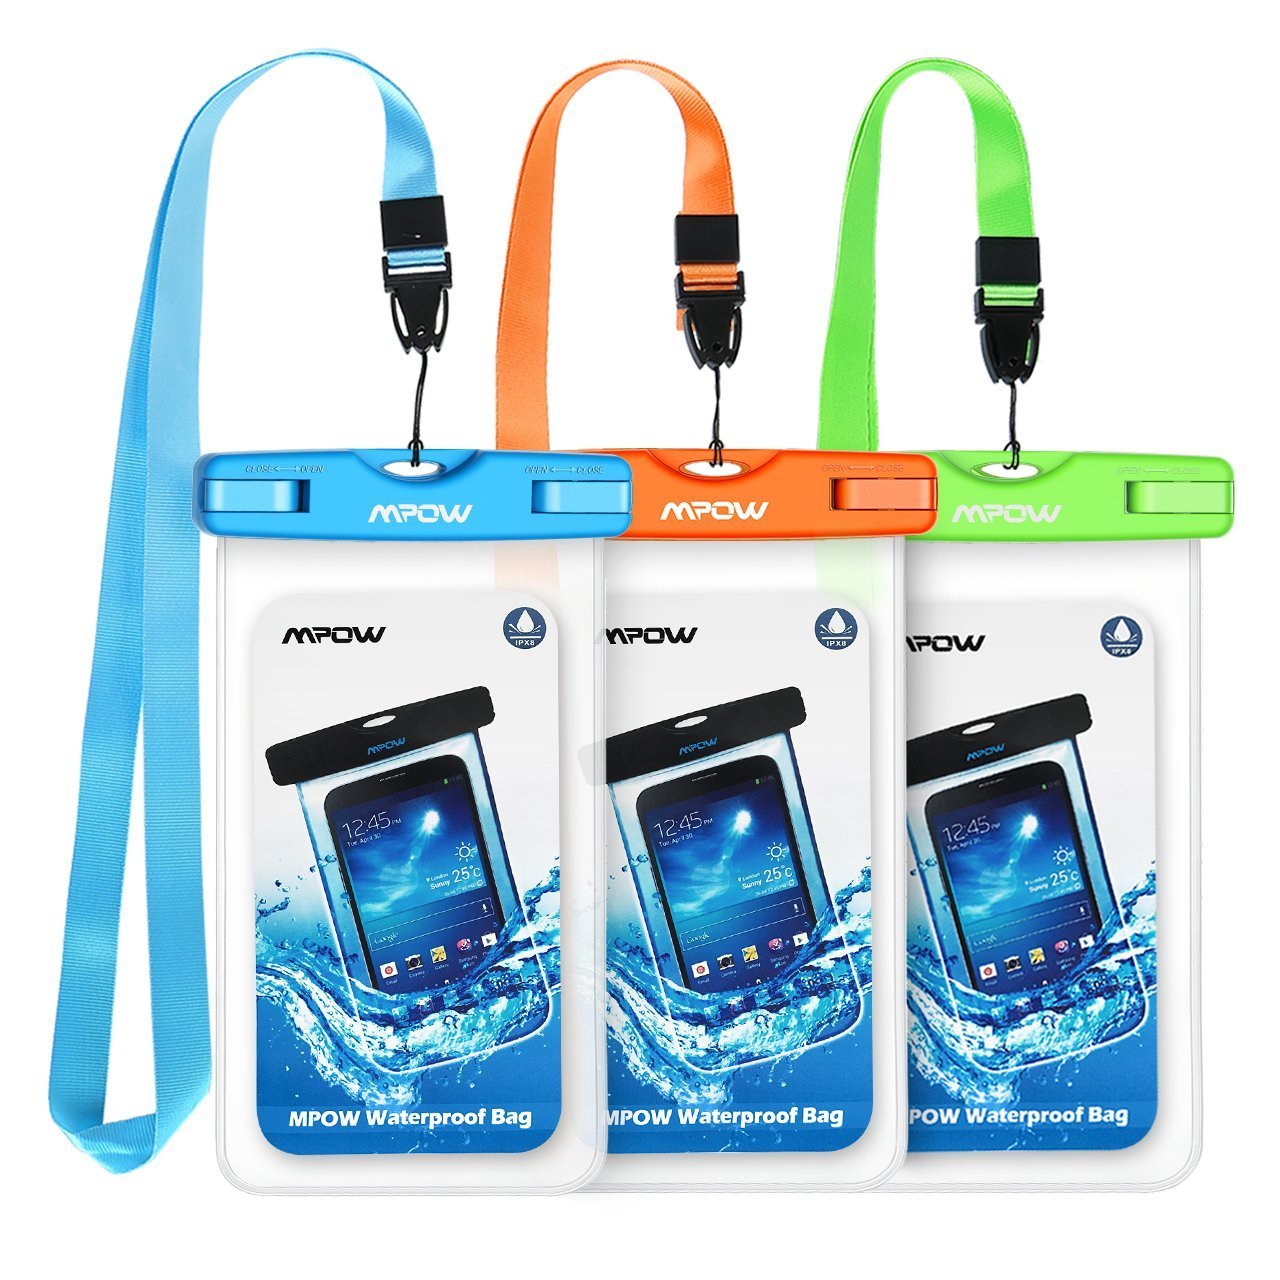 Mpow waterproof pouches